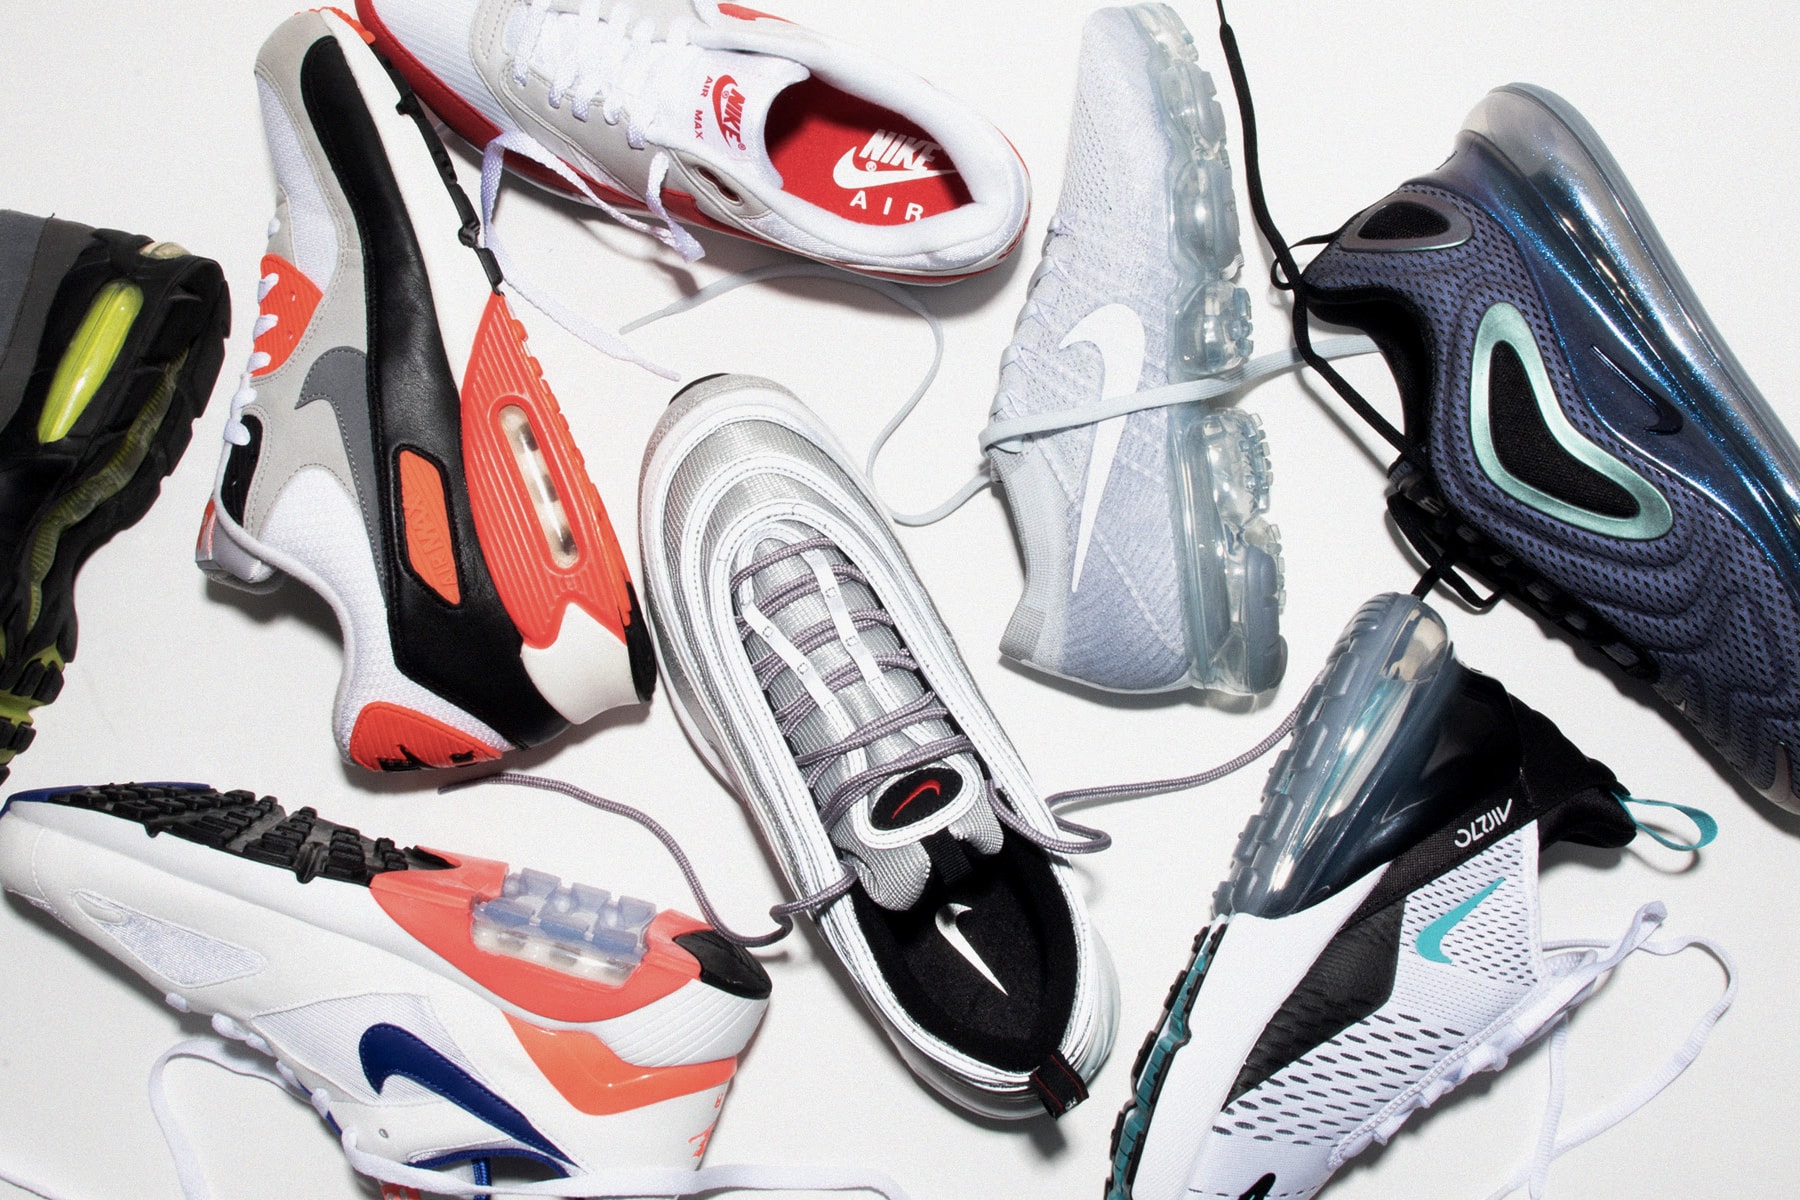 Nike Air Max Day Flight Club Sneaker Raffle Win All Air Max Silhouettes Shoes Competition 